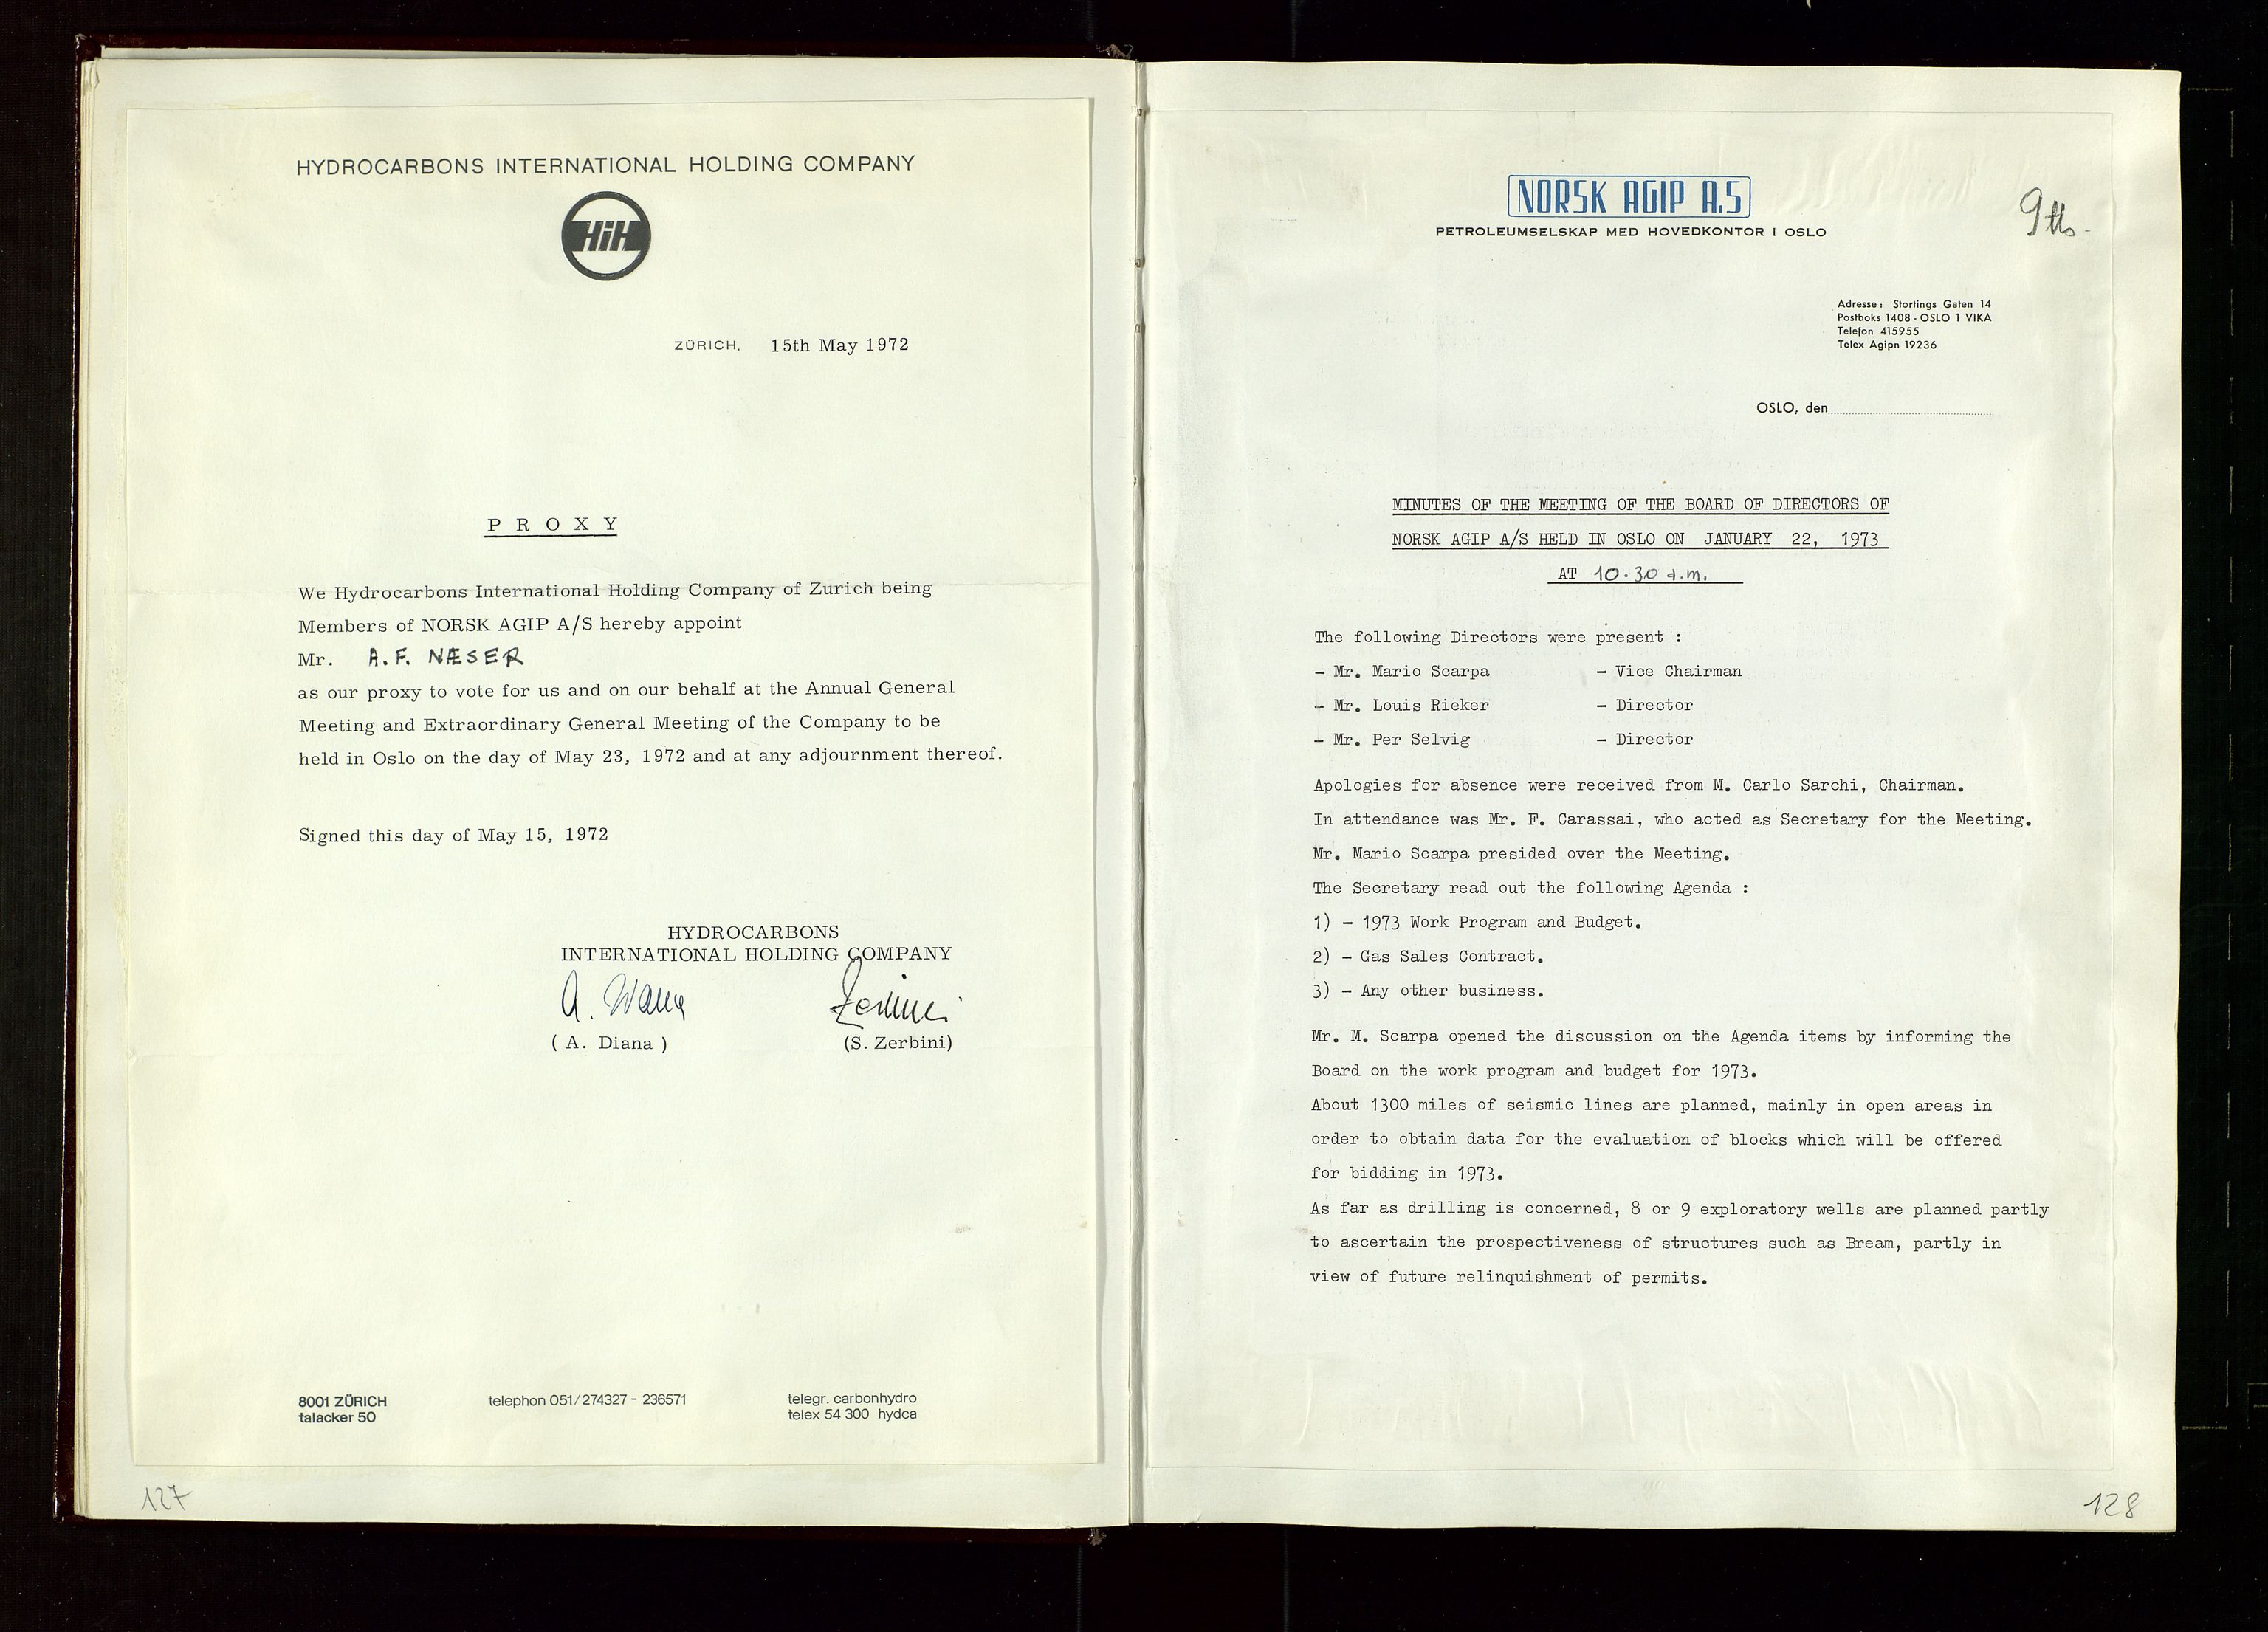 Pa 1583 - Norsk Agip AS, SAST/A-102138/A/Aa/L0002: General assembly and Board of Directors meeting minutes, 1972-1979, s. 127-128